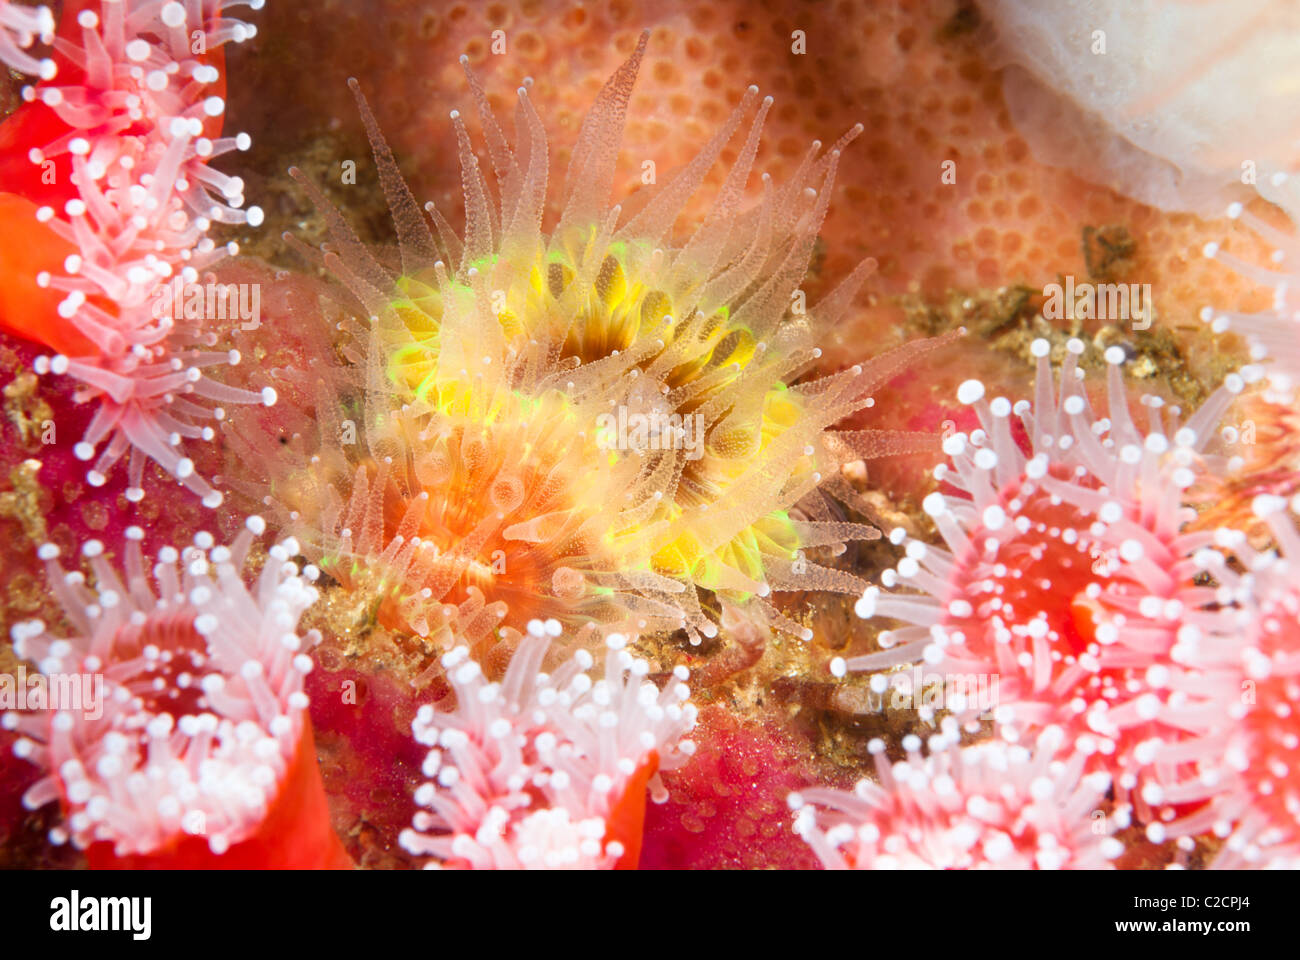 A yellow cup coral anemone surrounded by beautiful red strawberry anemones Stock Photo